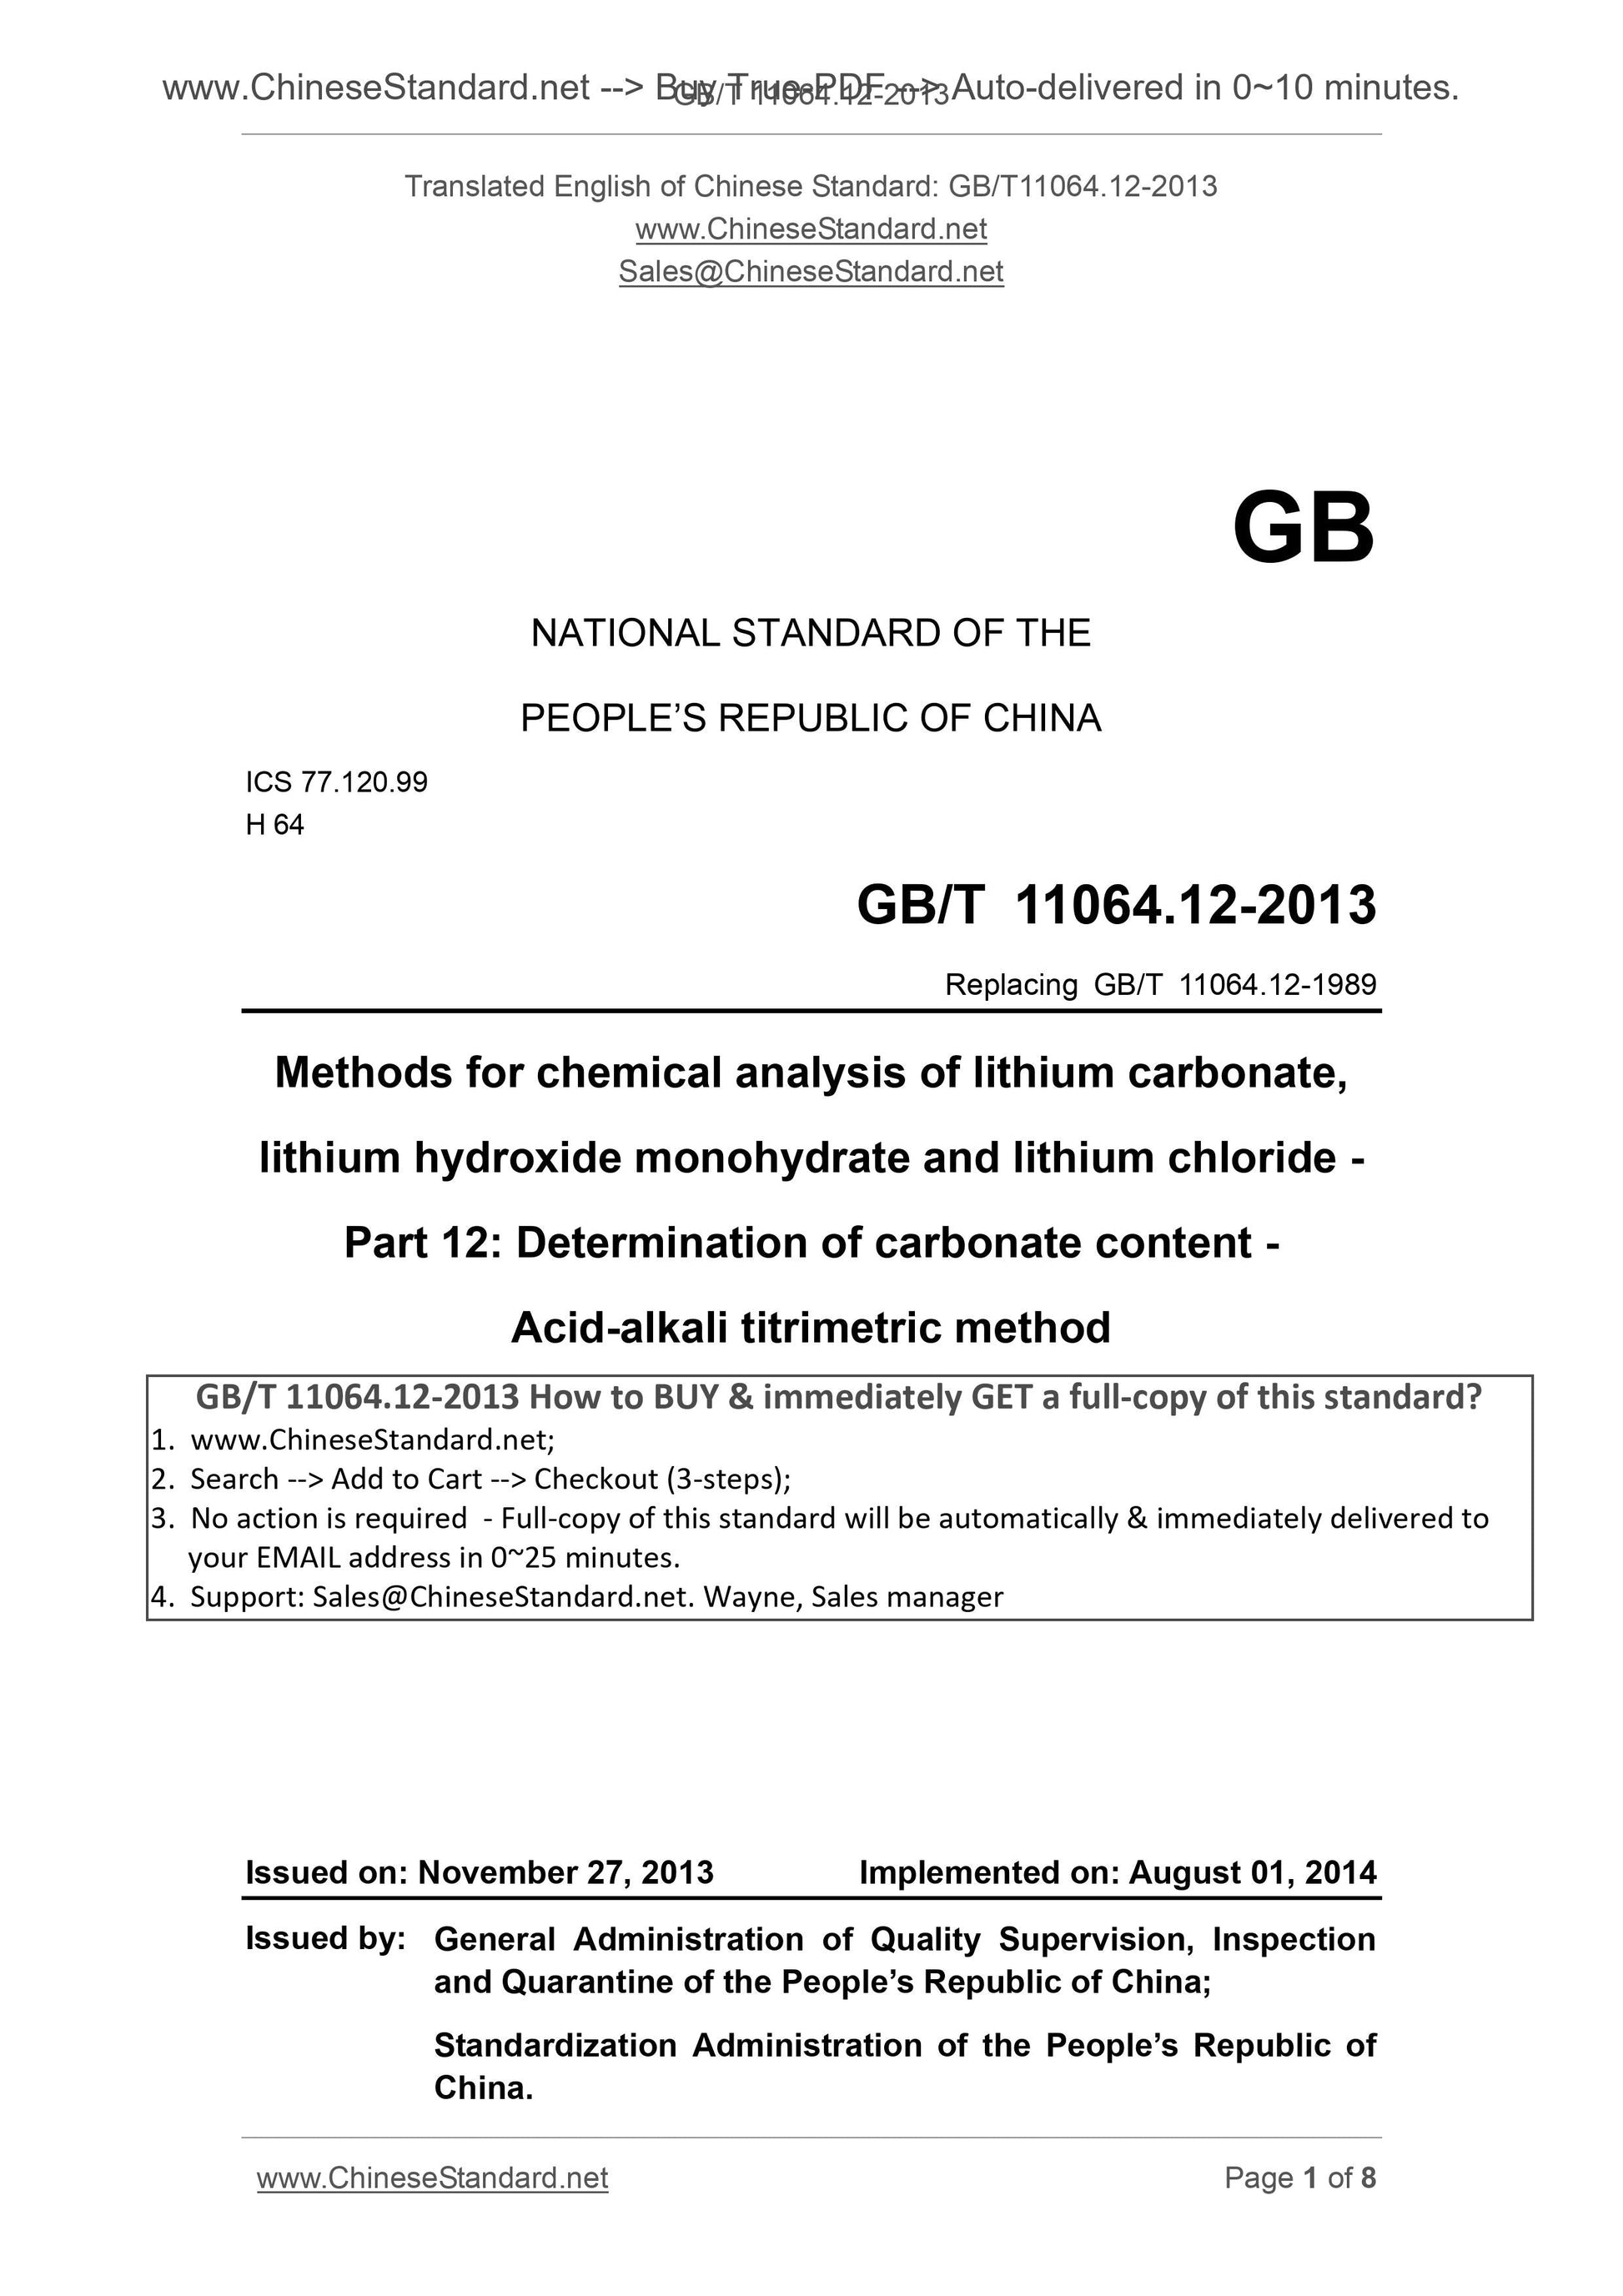 GB/T 11064.12-2013 Page 1